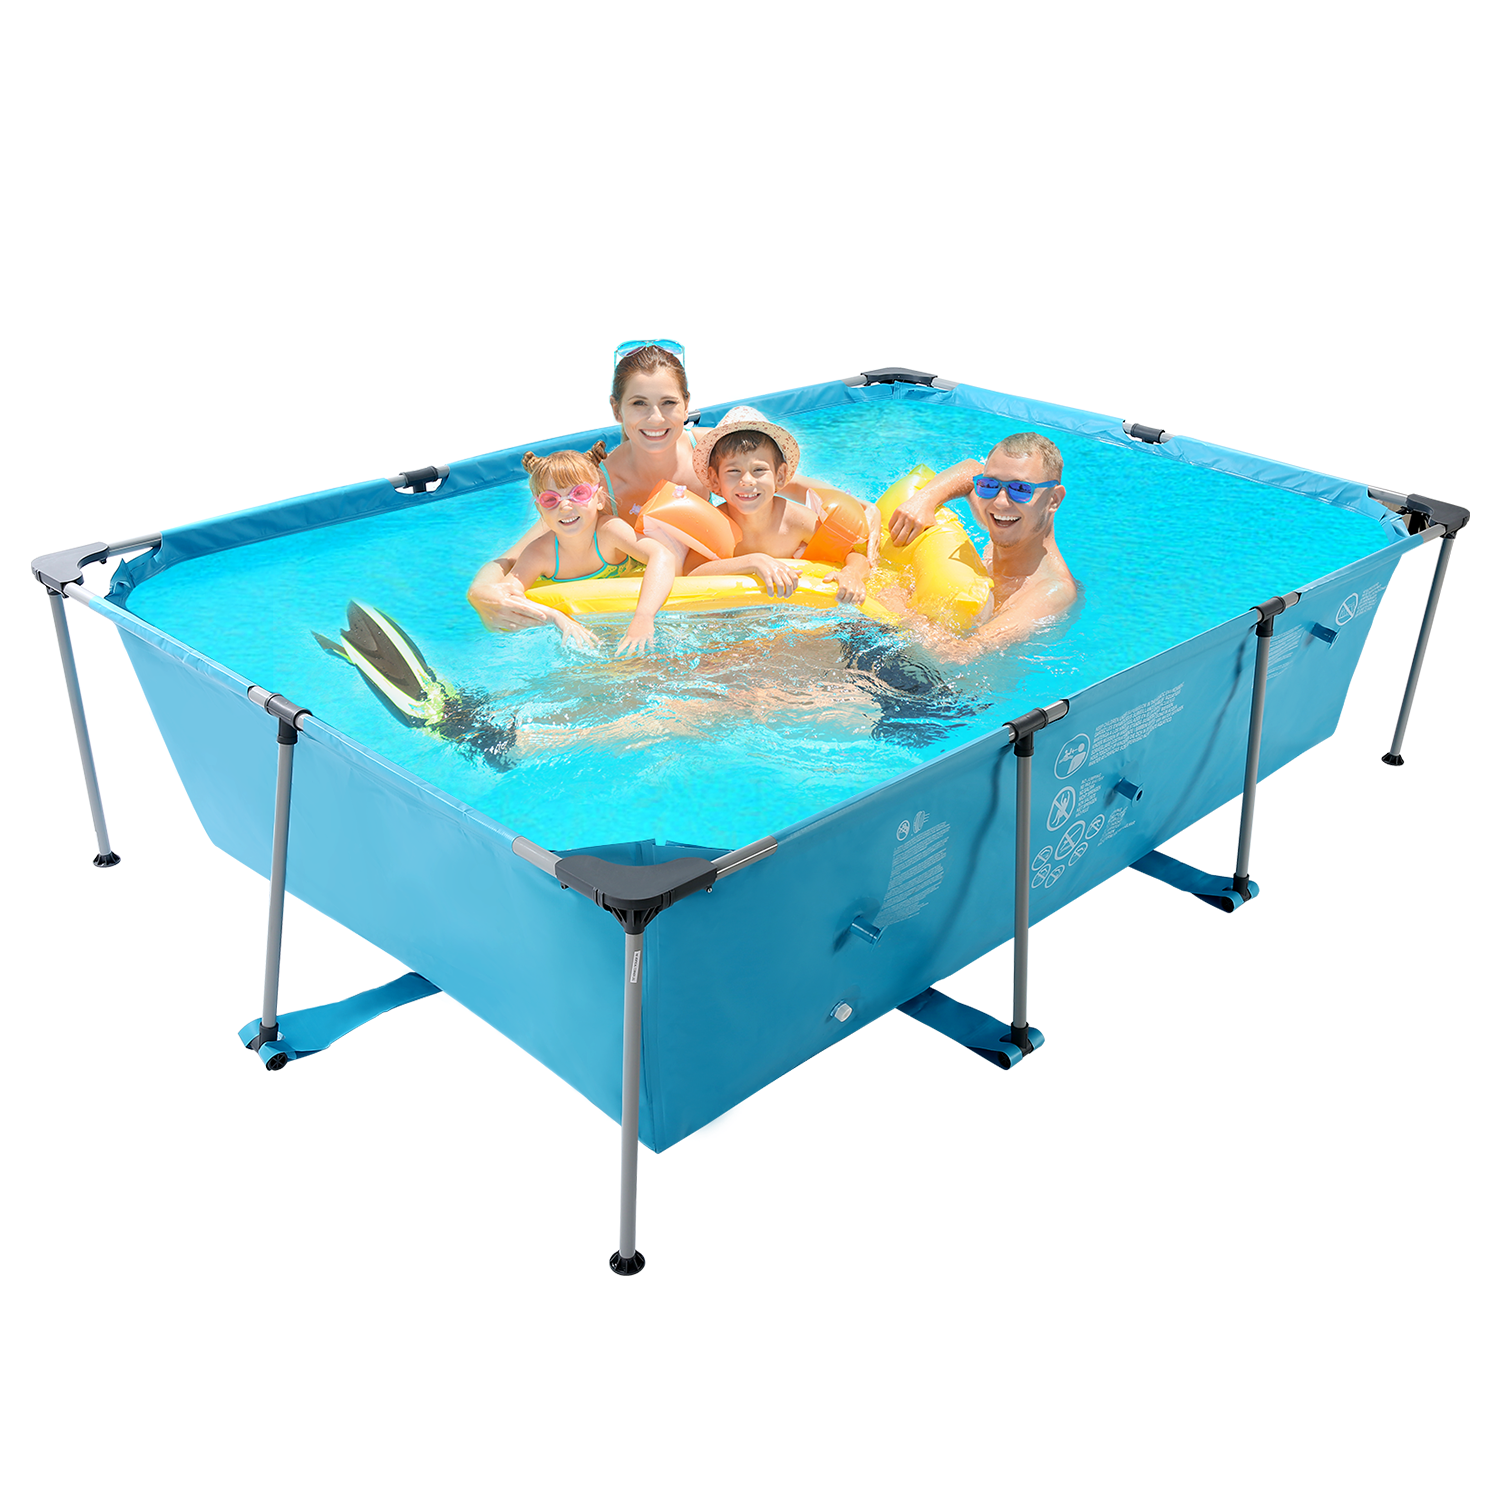 Intex 10ft Frame Pool Review - The Spirited Puddle Jumper